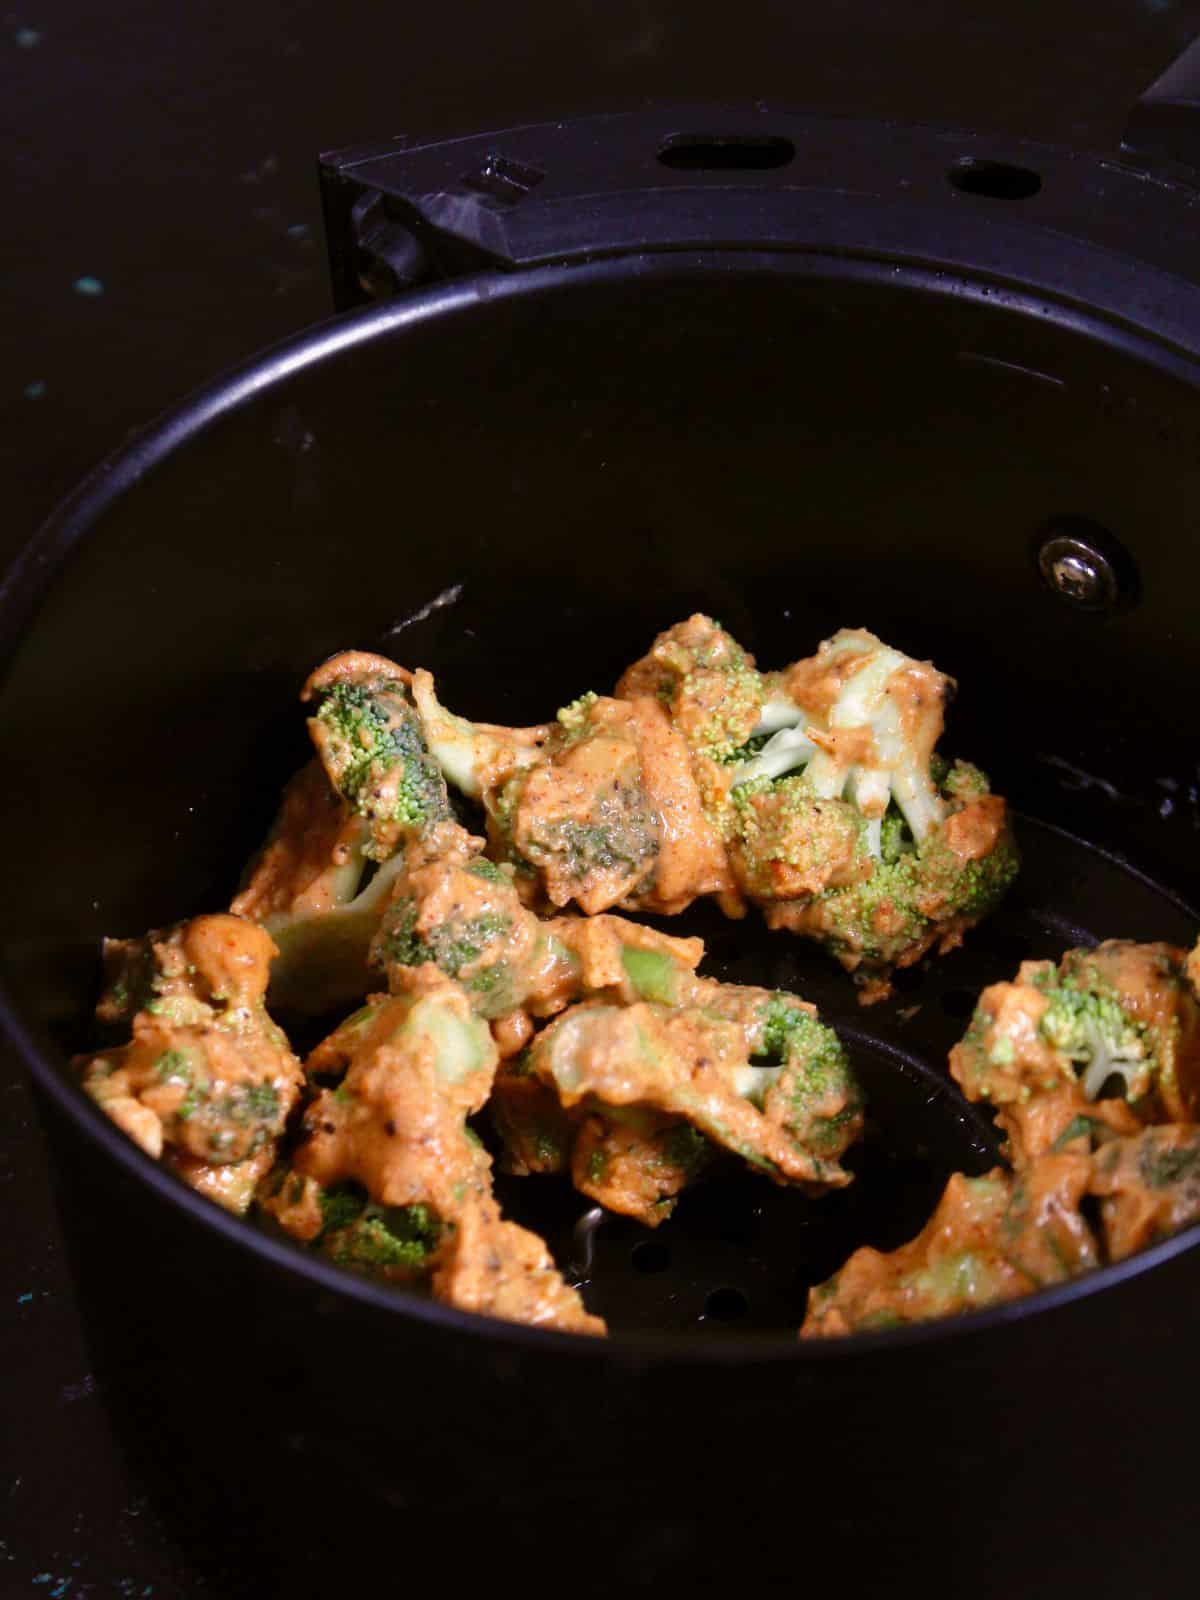 transfer the coated broccoli florets into an air fryer 